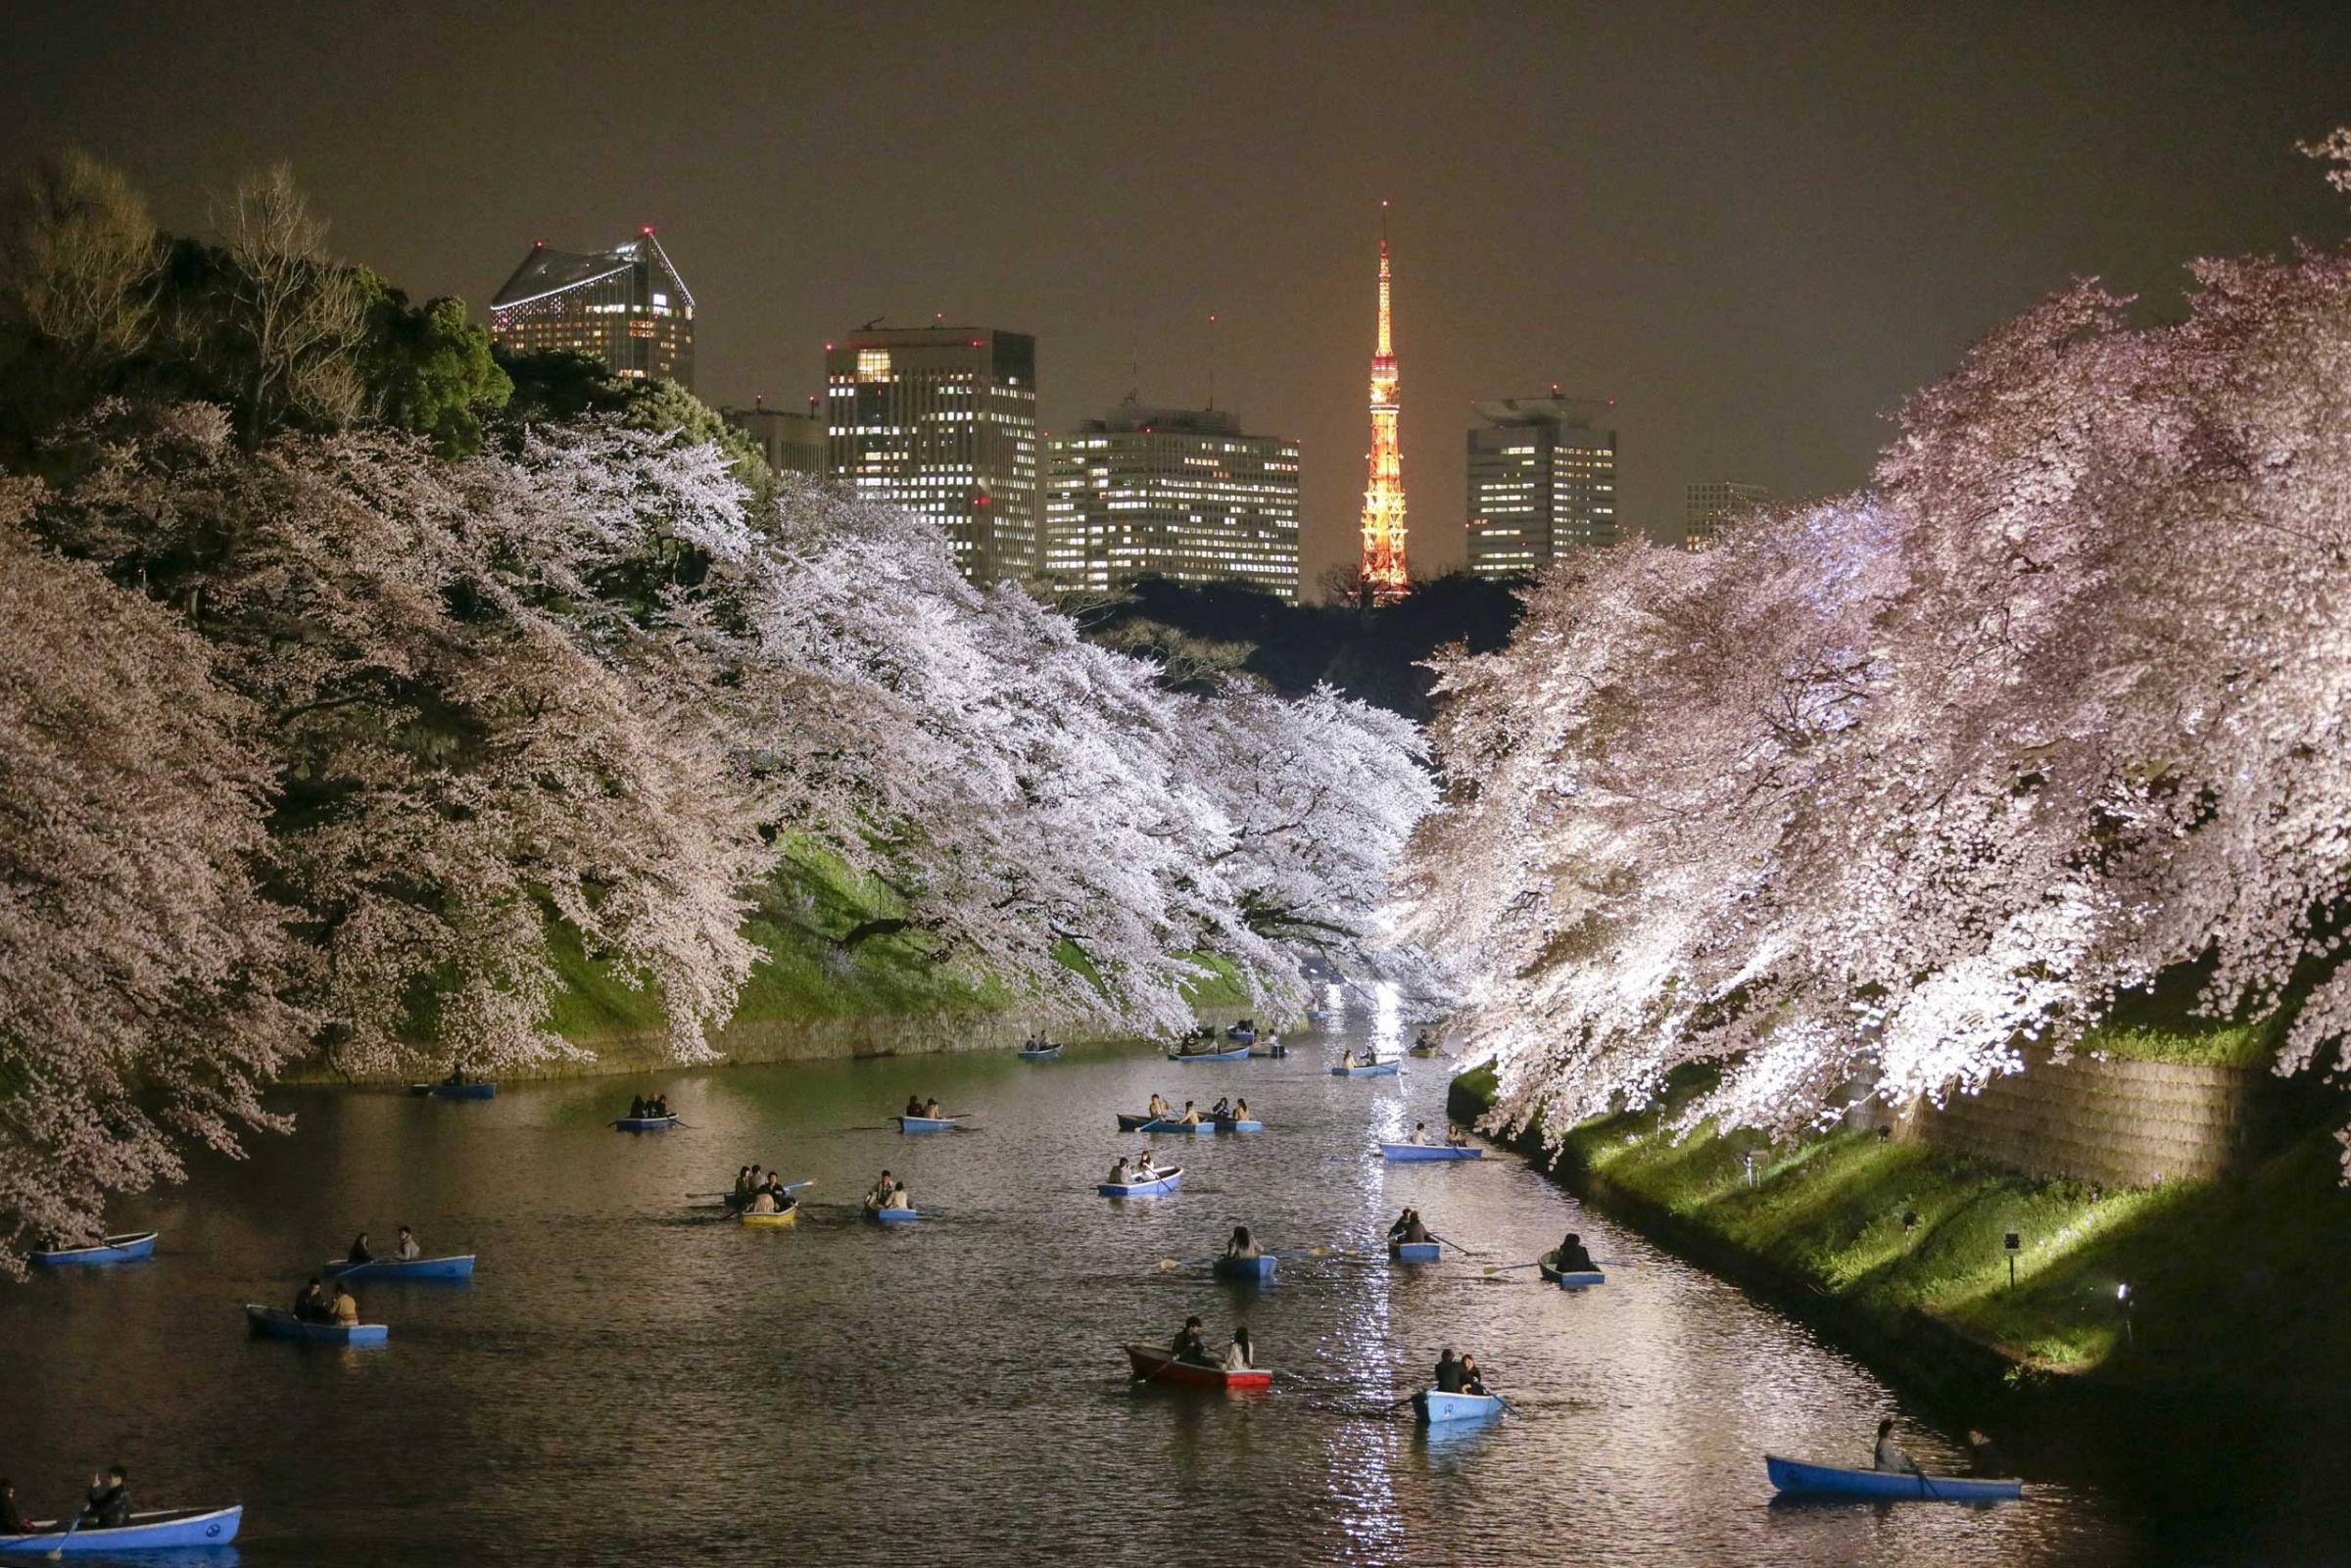 People rowing boats enjoy night view of cherry blossoms in full bloom on Chidorigafuchi moat in Tokyo, March 30, 2015.